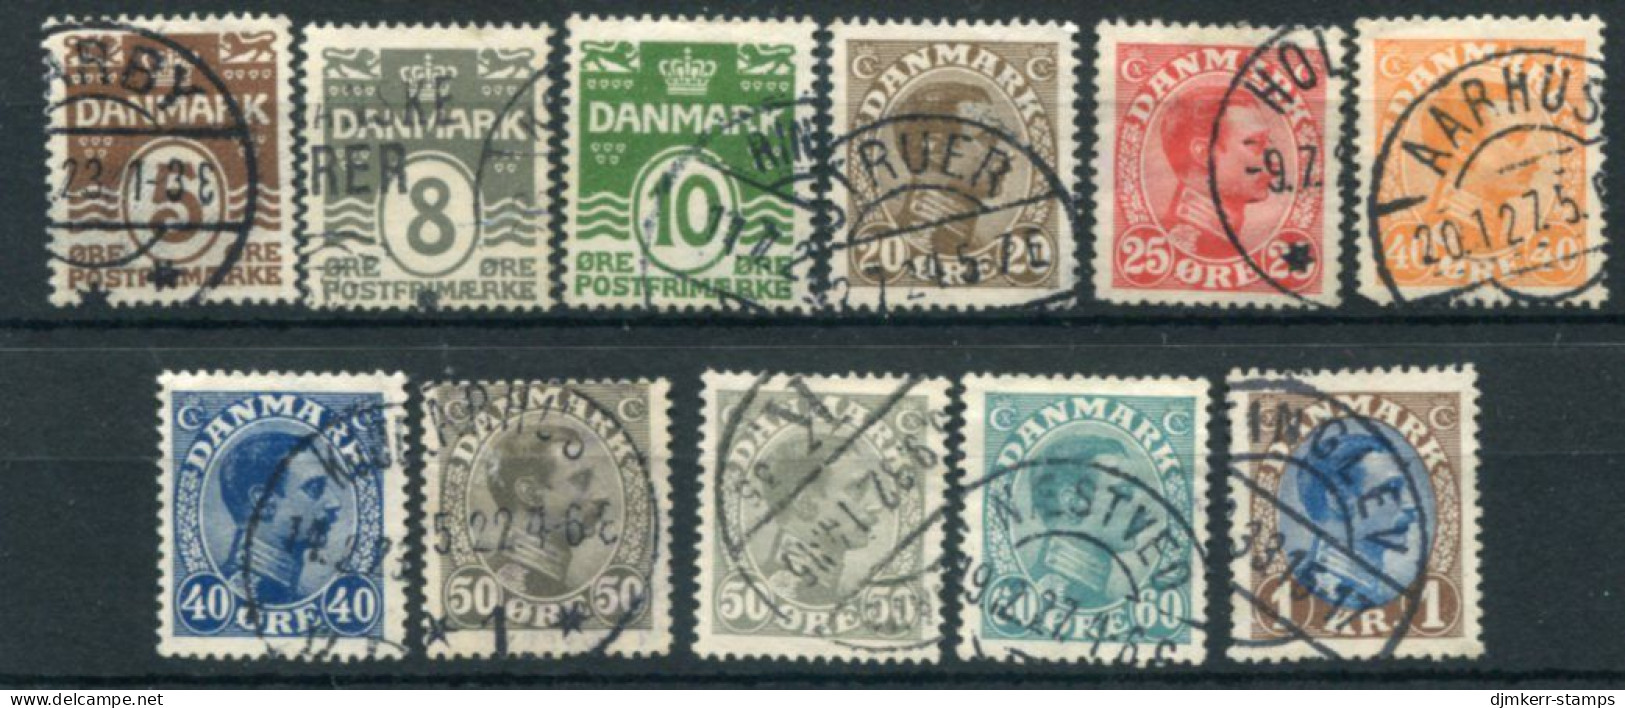 DENMARK 1921-22 Numeral And King Christian X Definitives Used .  Michel 118-28 - Gebraucht